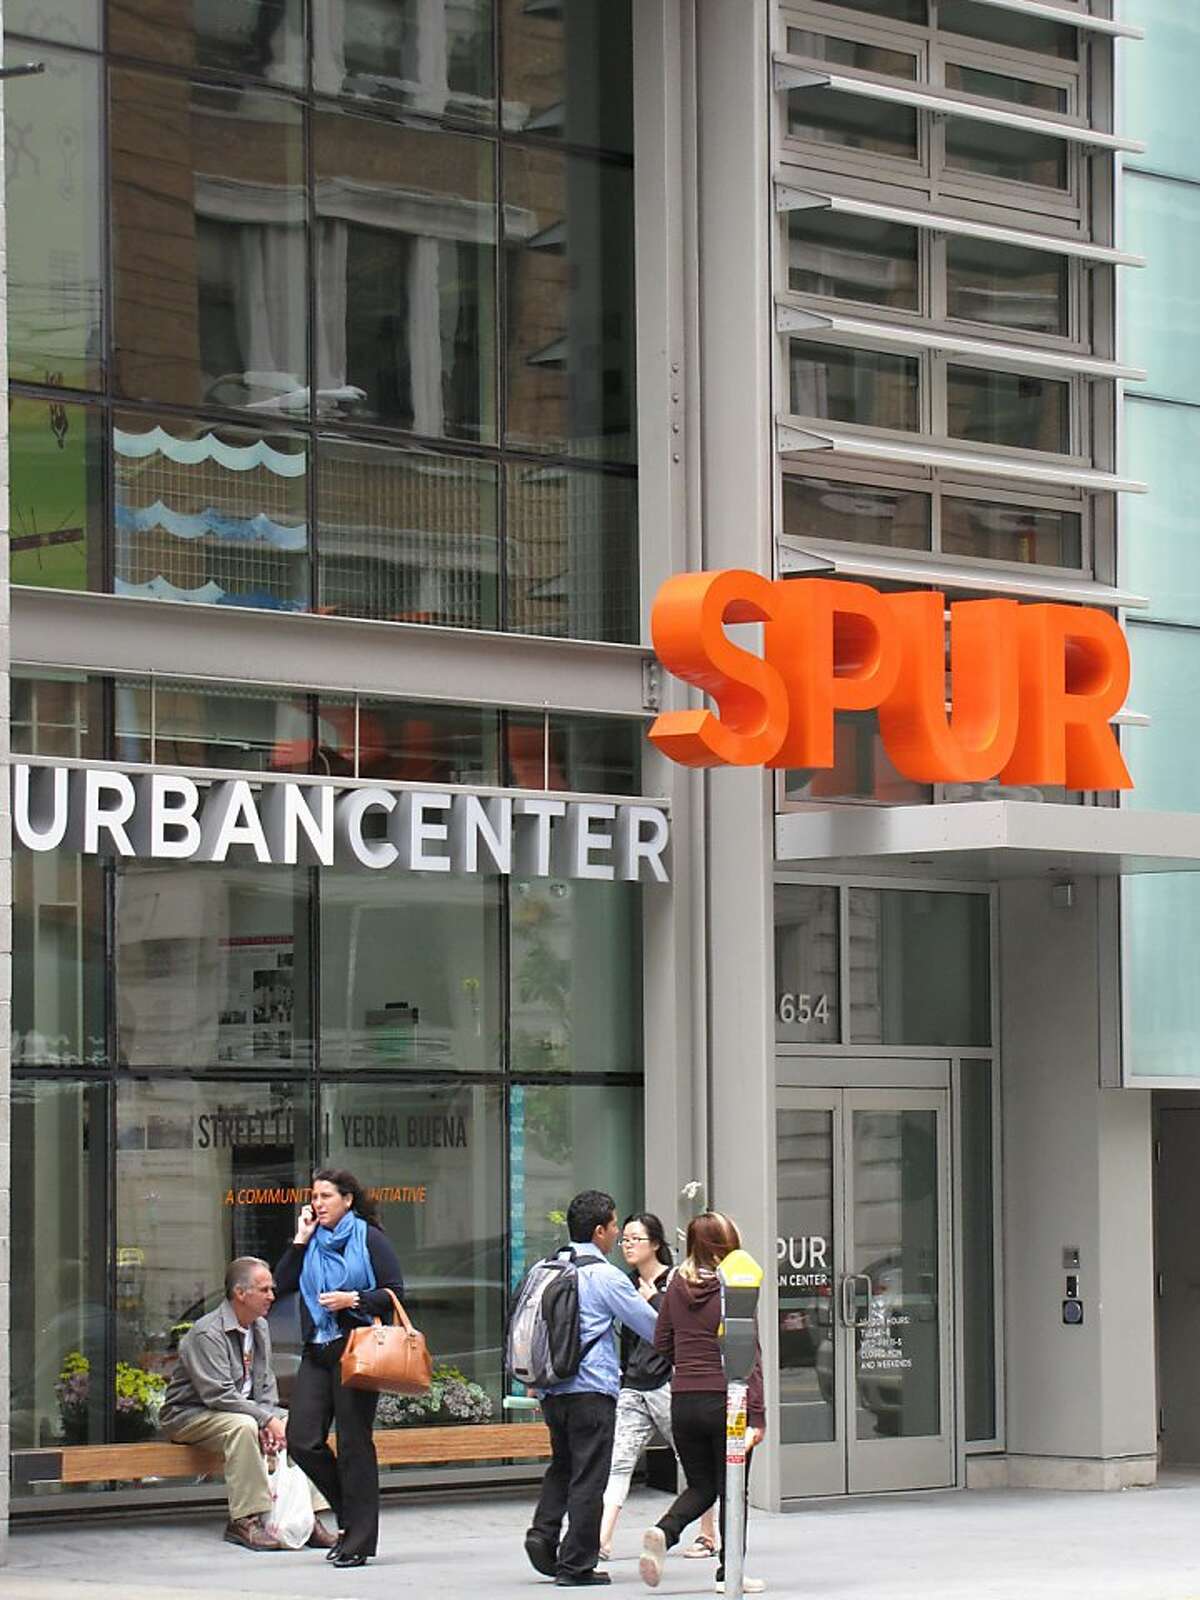 The SPUR Urban Center is an example of contemporary design that manages to be civil and contextual as well.